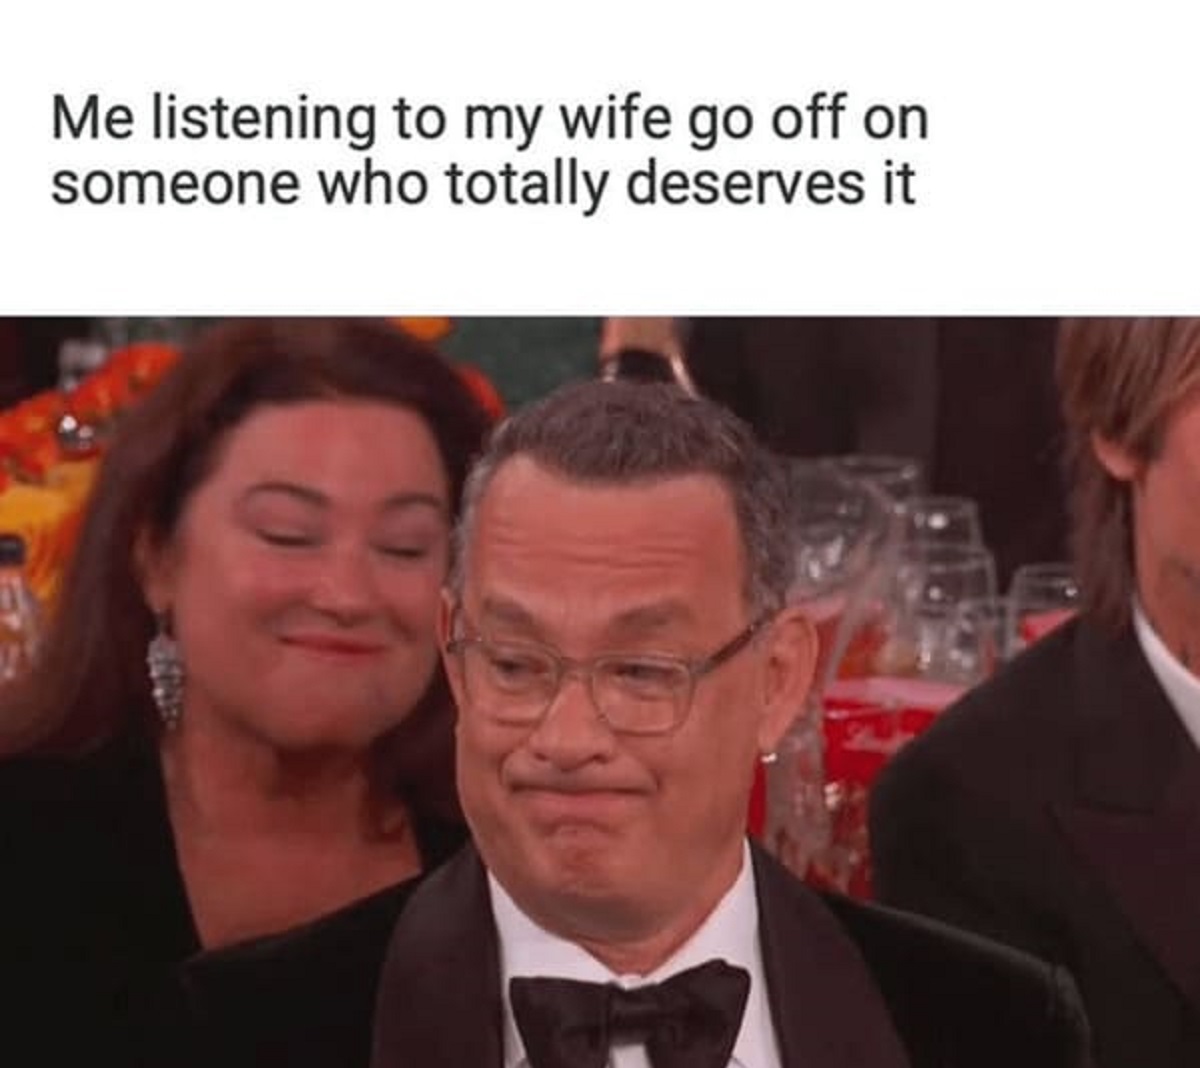 tom hanks golden globes 2020 - Me listening to my wife go off on someone who totally deserves it